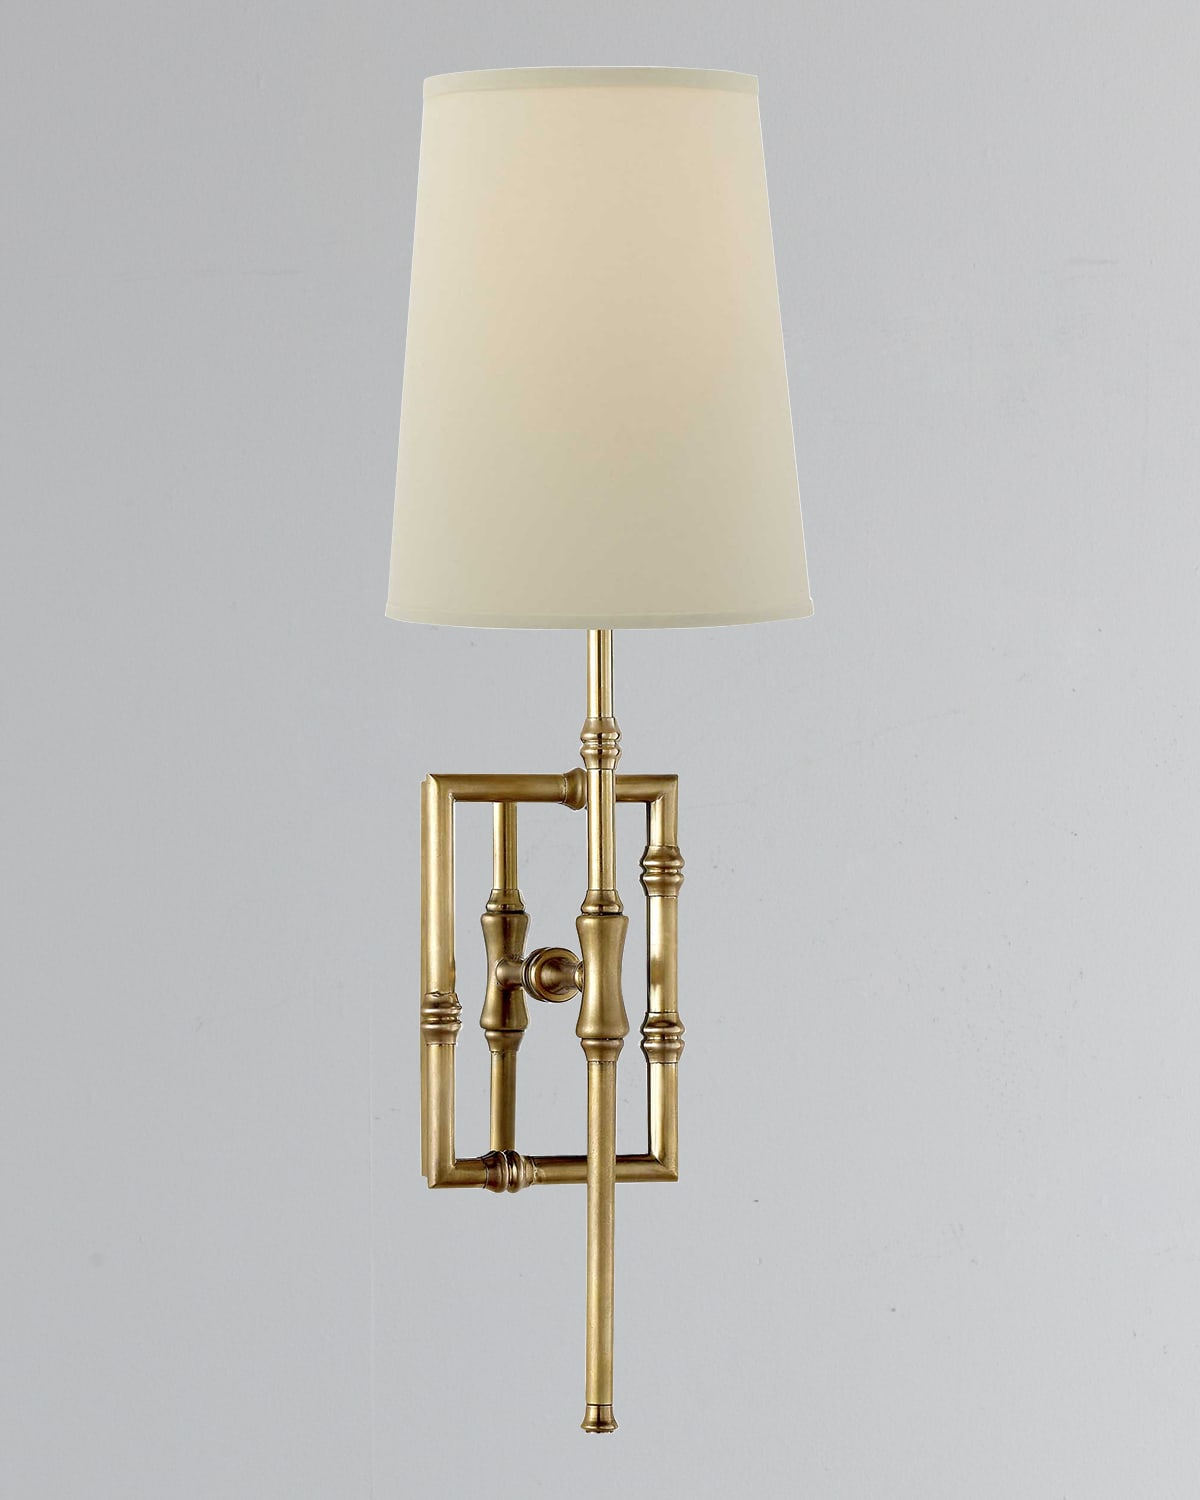 Visual Comfort Lighting Wilton Double Sconces In Hand Rubbed Antique Brass  Design Ideas